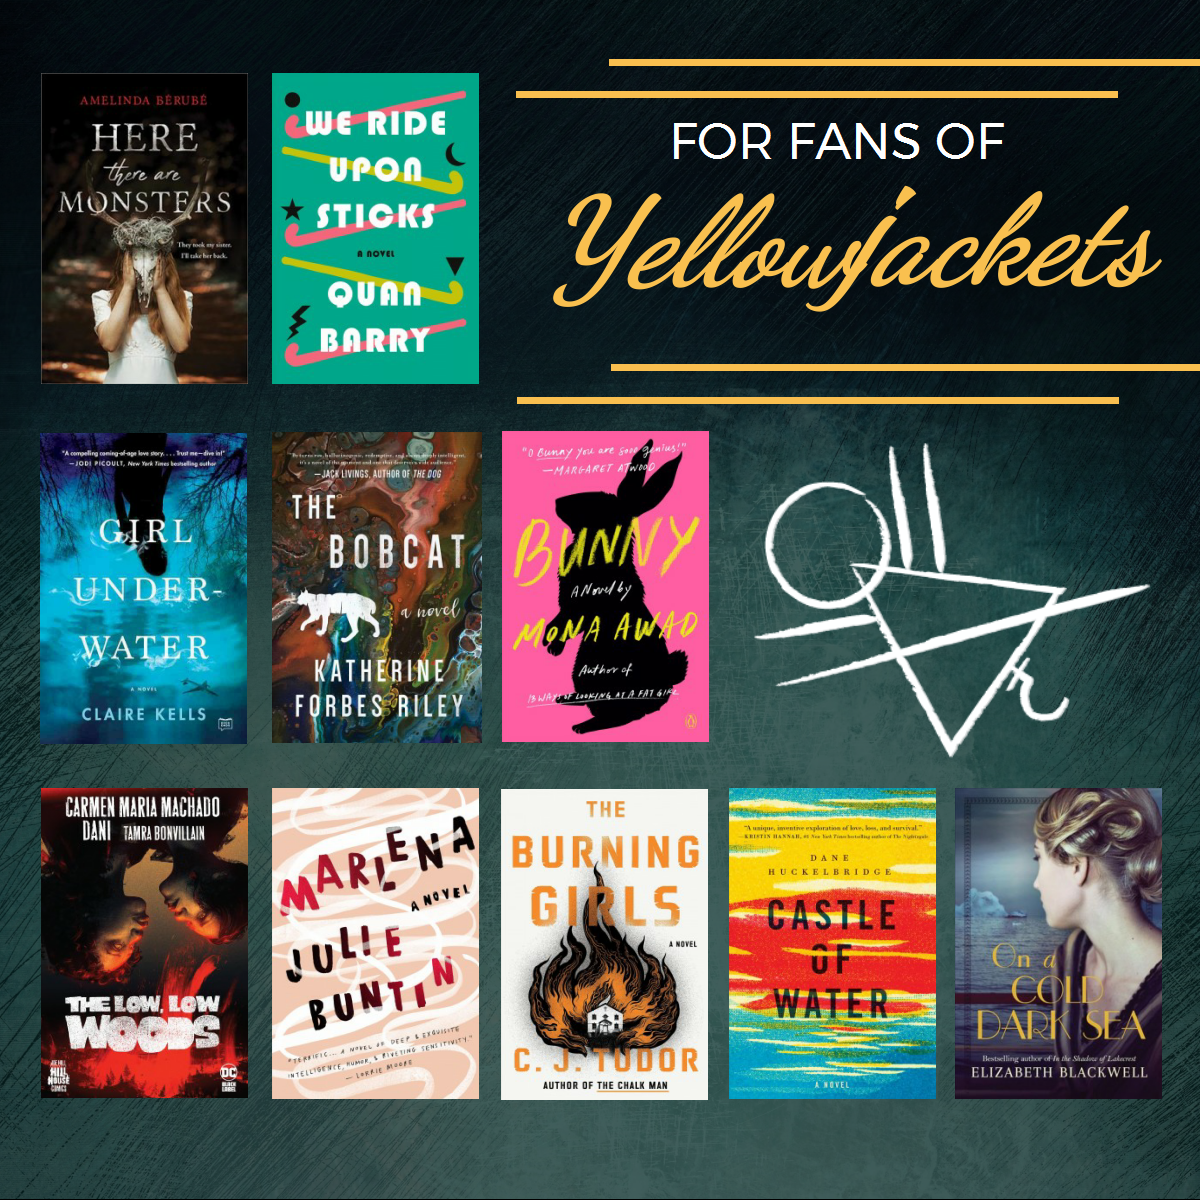 Link to book list For Fans of "Yellowjackets" TV show.